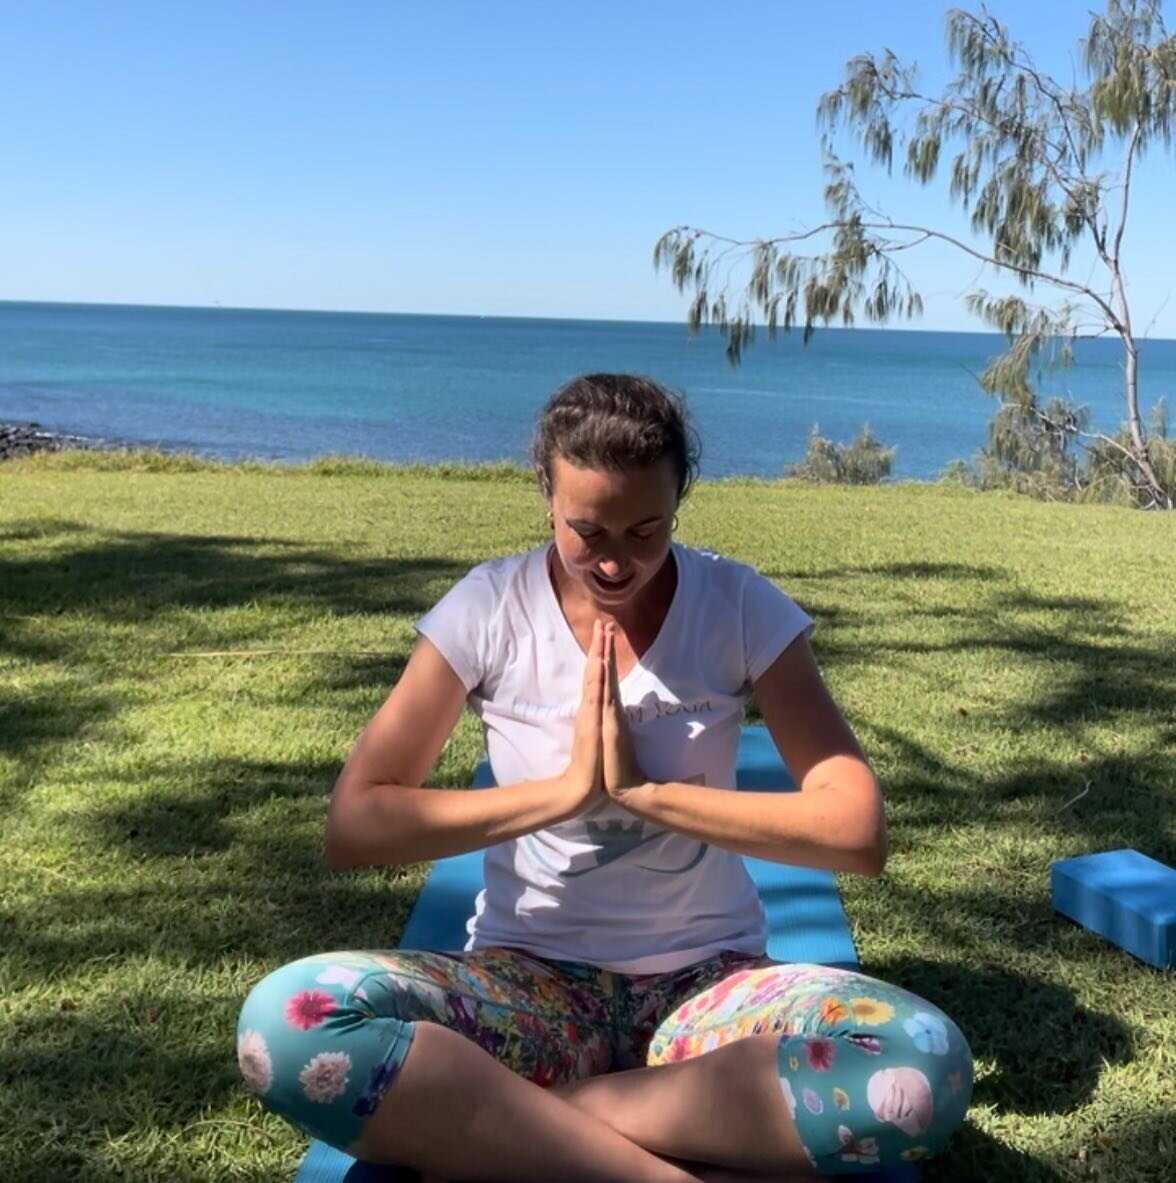 Yoga during this long weekend away has been so beneficial to help me to keep moving my body, some time just for me and to get outdoors and enjoy this magical weather at the coast 🏖️
.
I hope you have enjoyed your long weekend no matter what or where